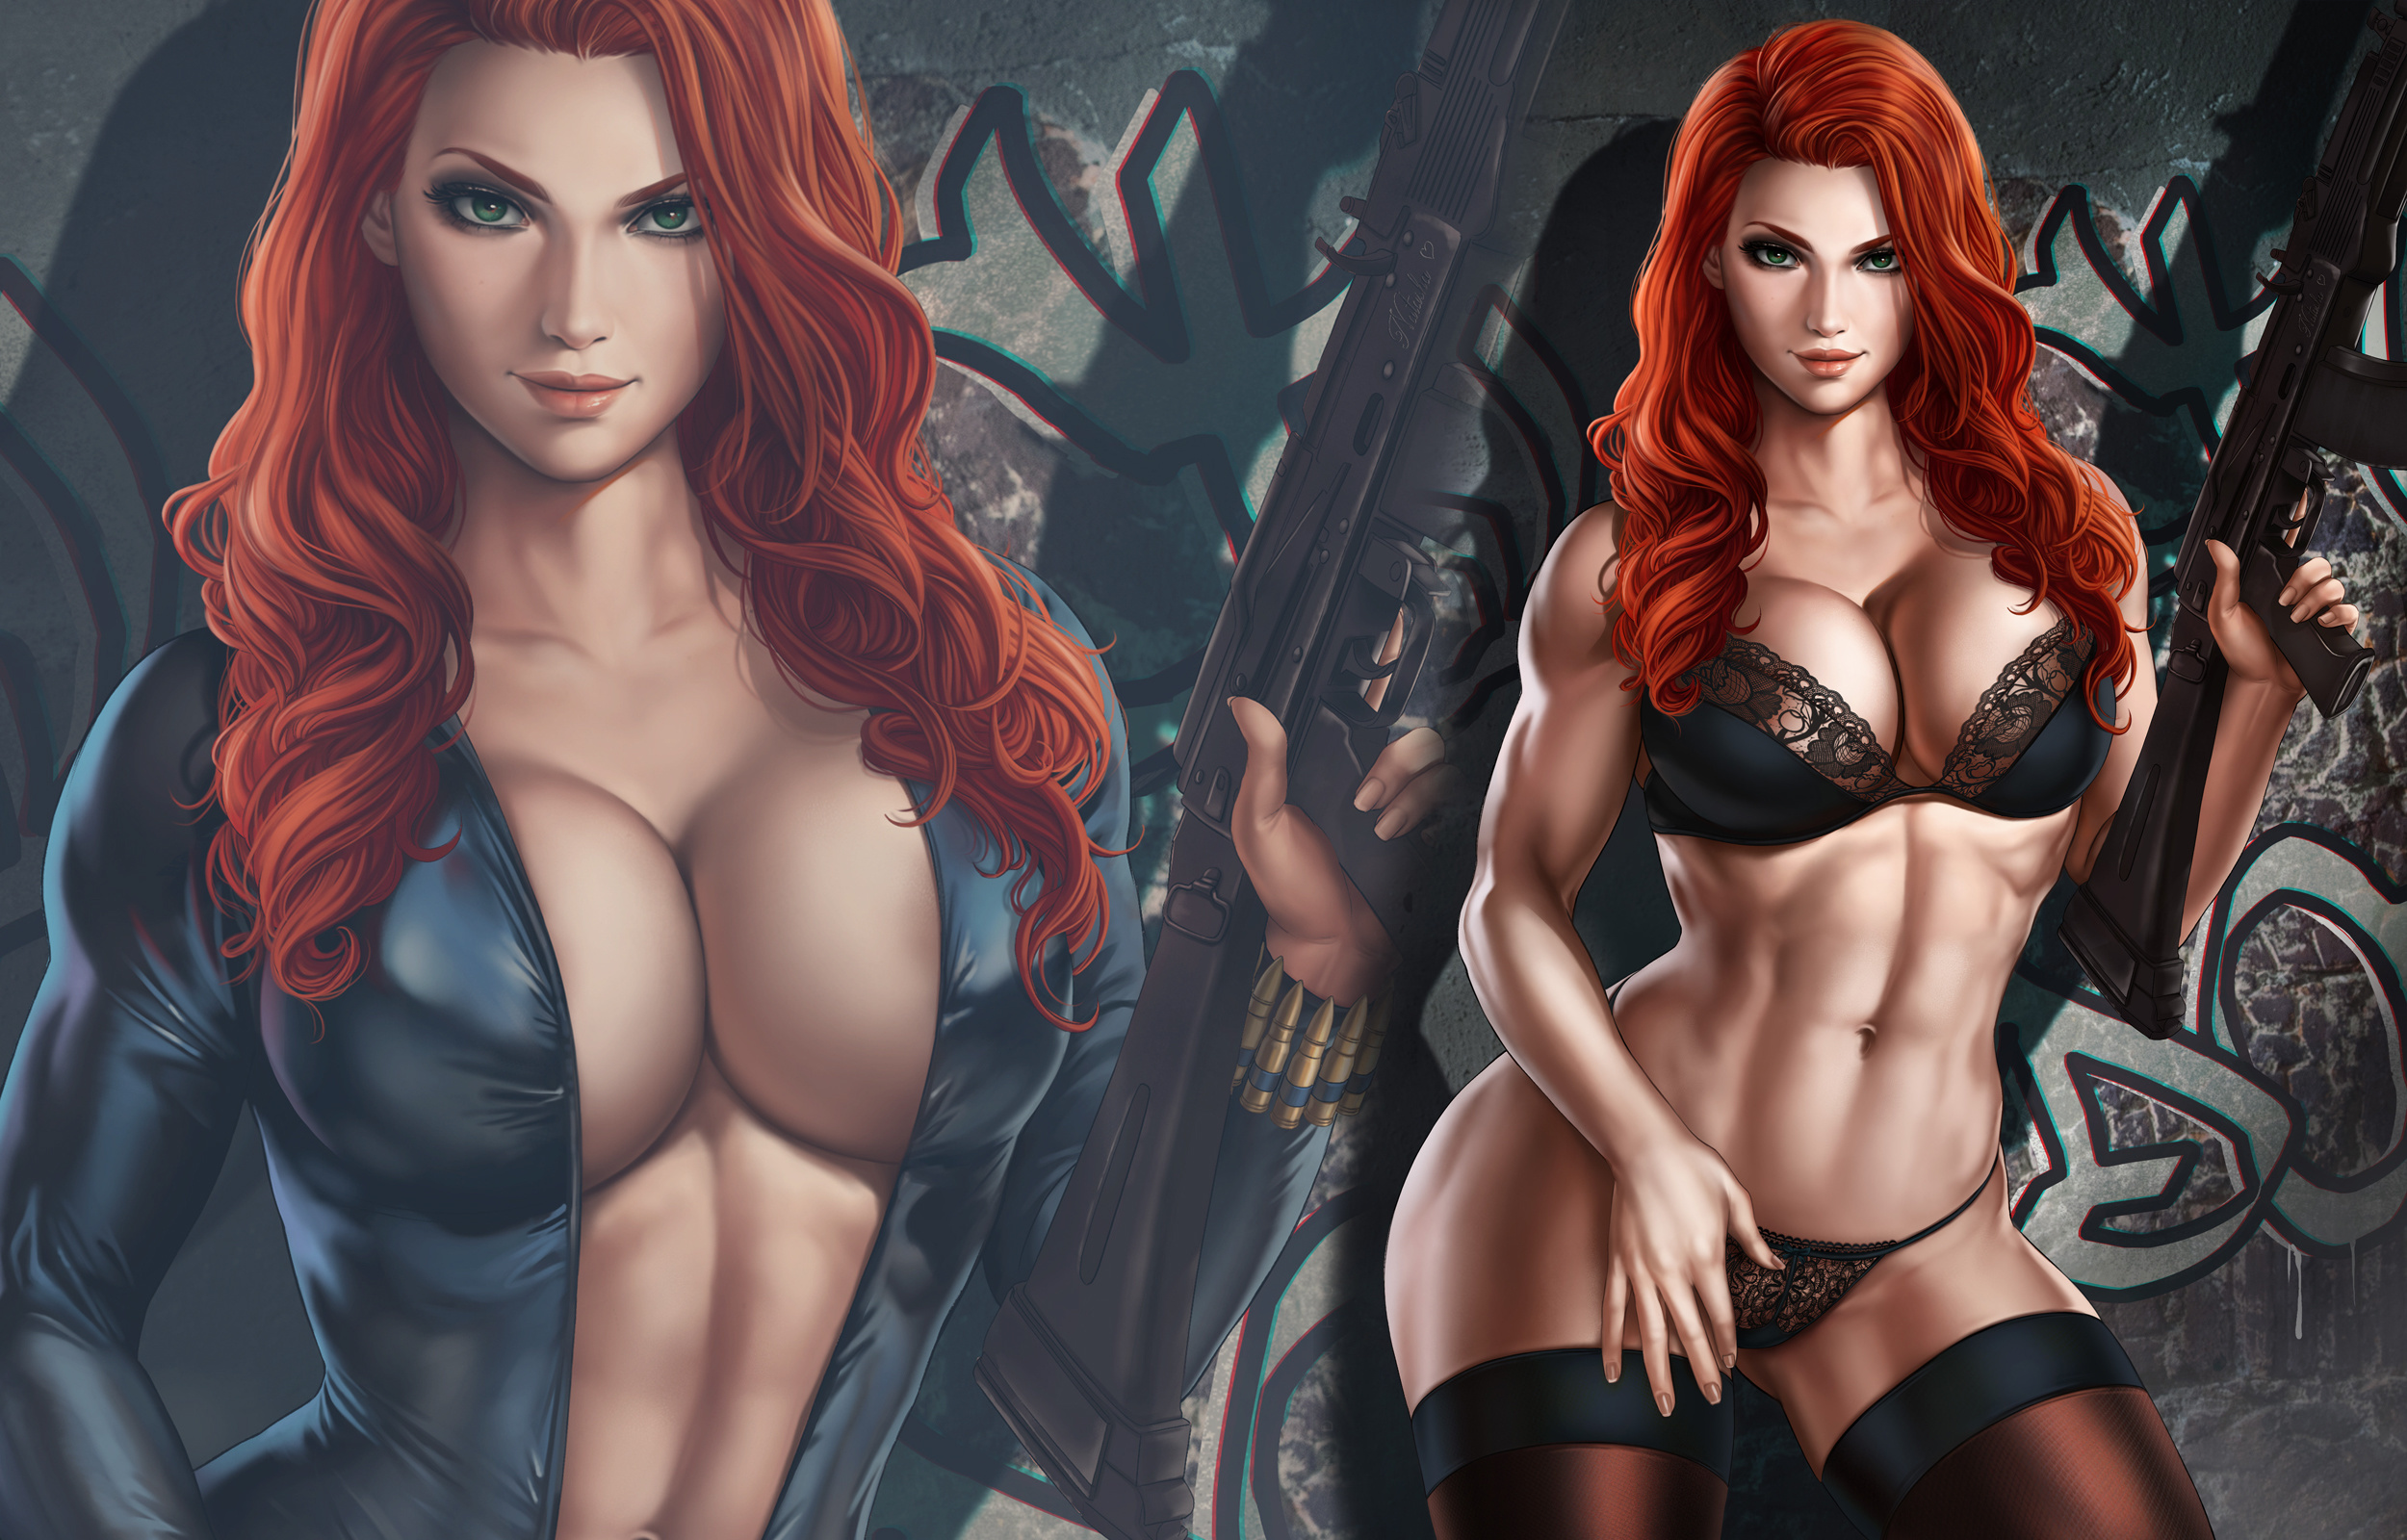 Wallpaper | Anime | photo | picture | black widow, Marvel, girl, sexy, Anime